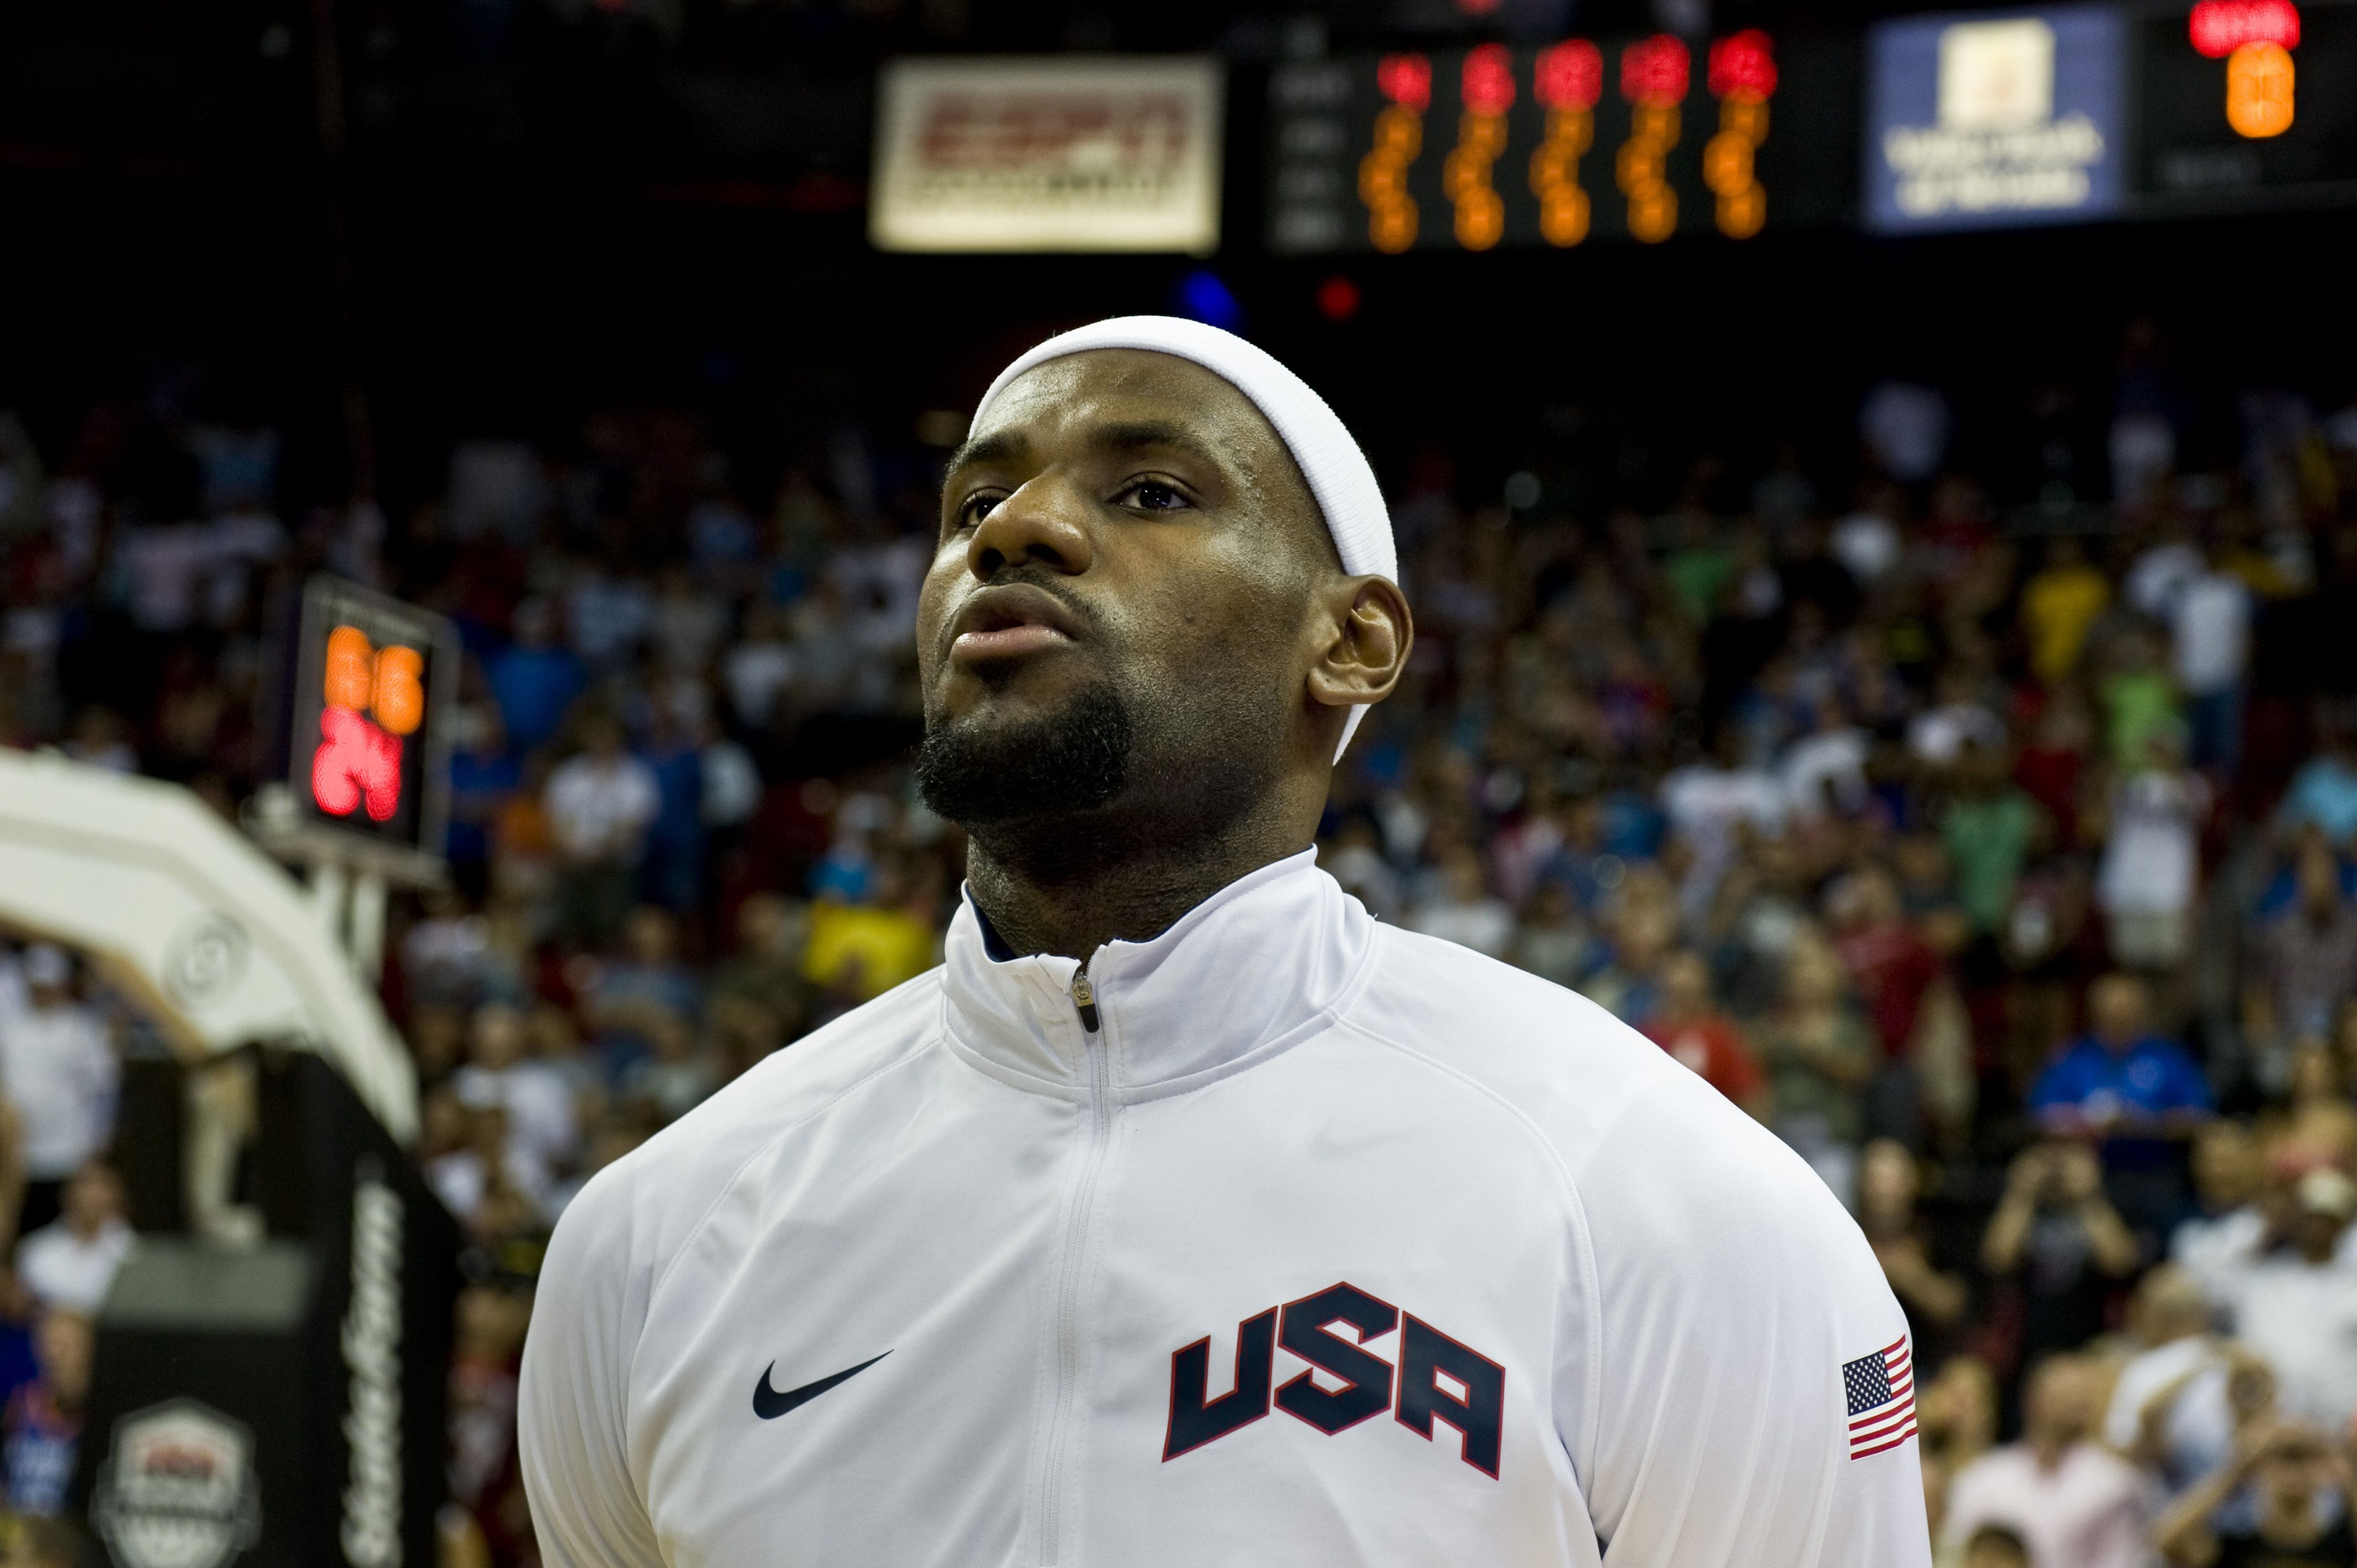 Lebron James, USA Olympic Men's Basketball player, listens to the National Anthem prior to the start of the USA versus  Dominican Republic exhibition game July 12, 2012, at the Thomas & Mack Center, Las Vegas, Nev. James is the only member of the 2012 Champion Miami Heat team on the Olympic Basketball team this year. (U.S. Air Force photo by Airman 1st Class Daniel Hughes)